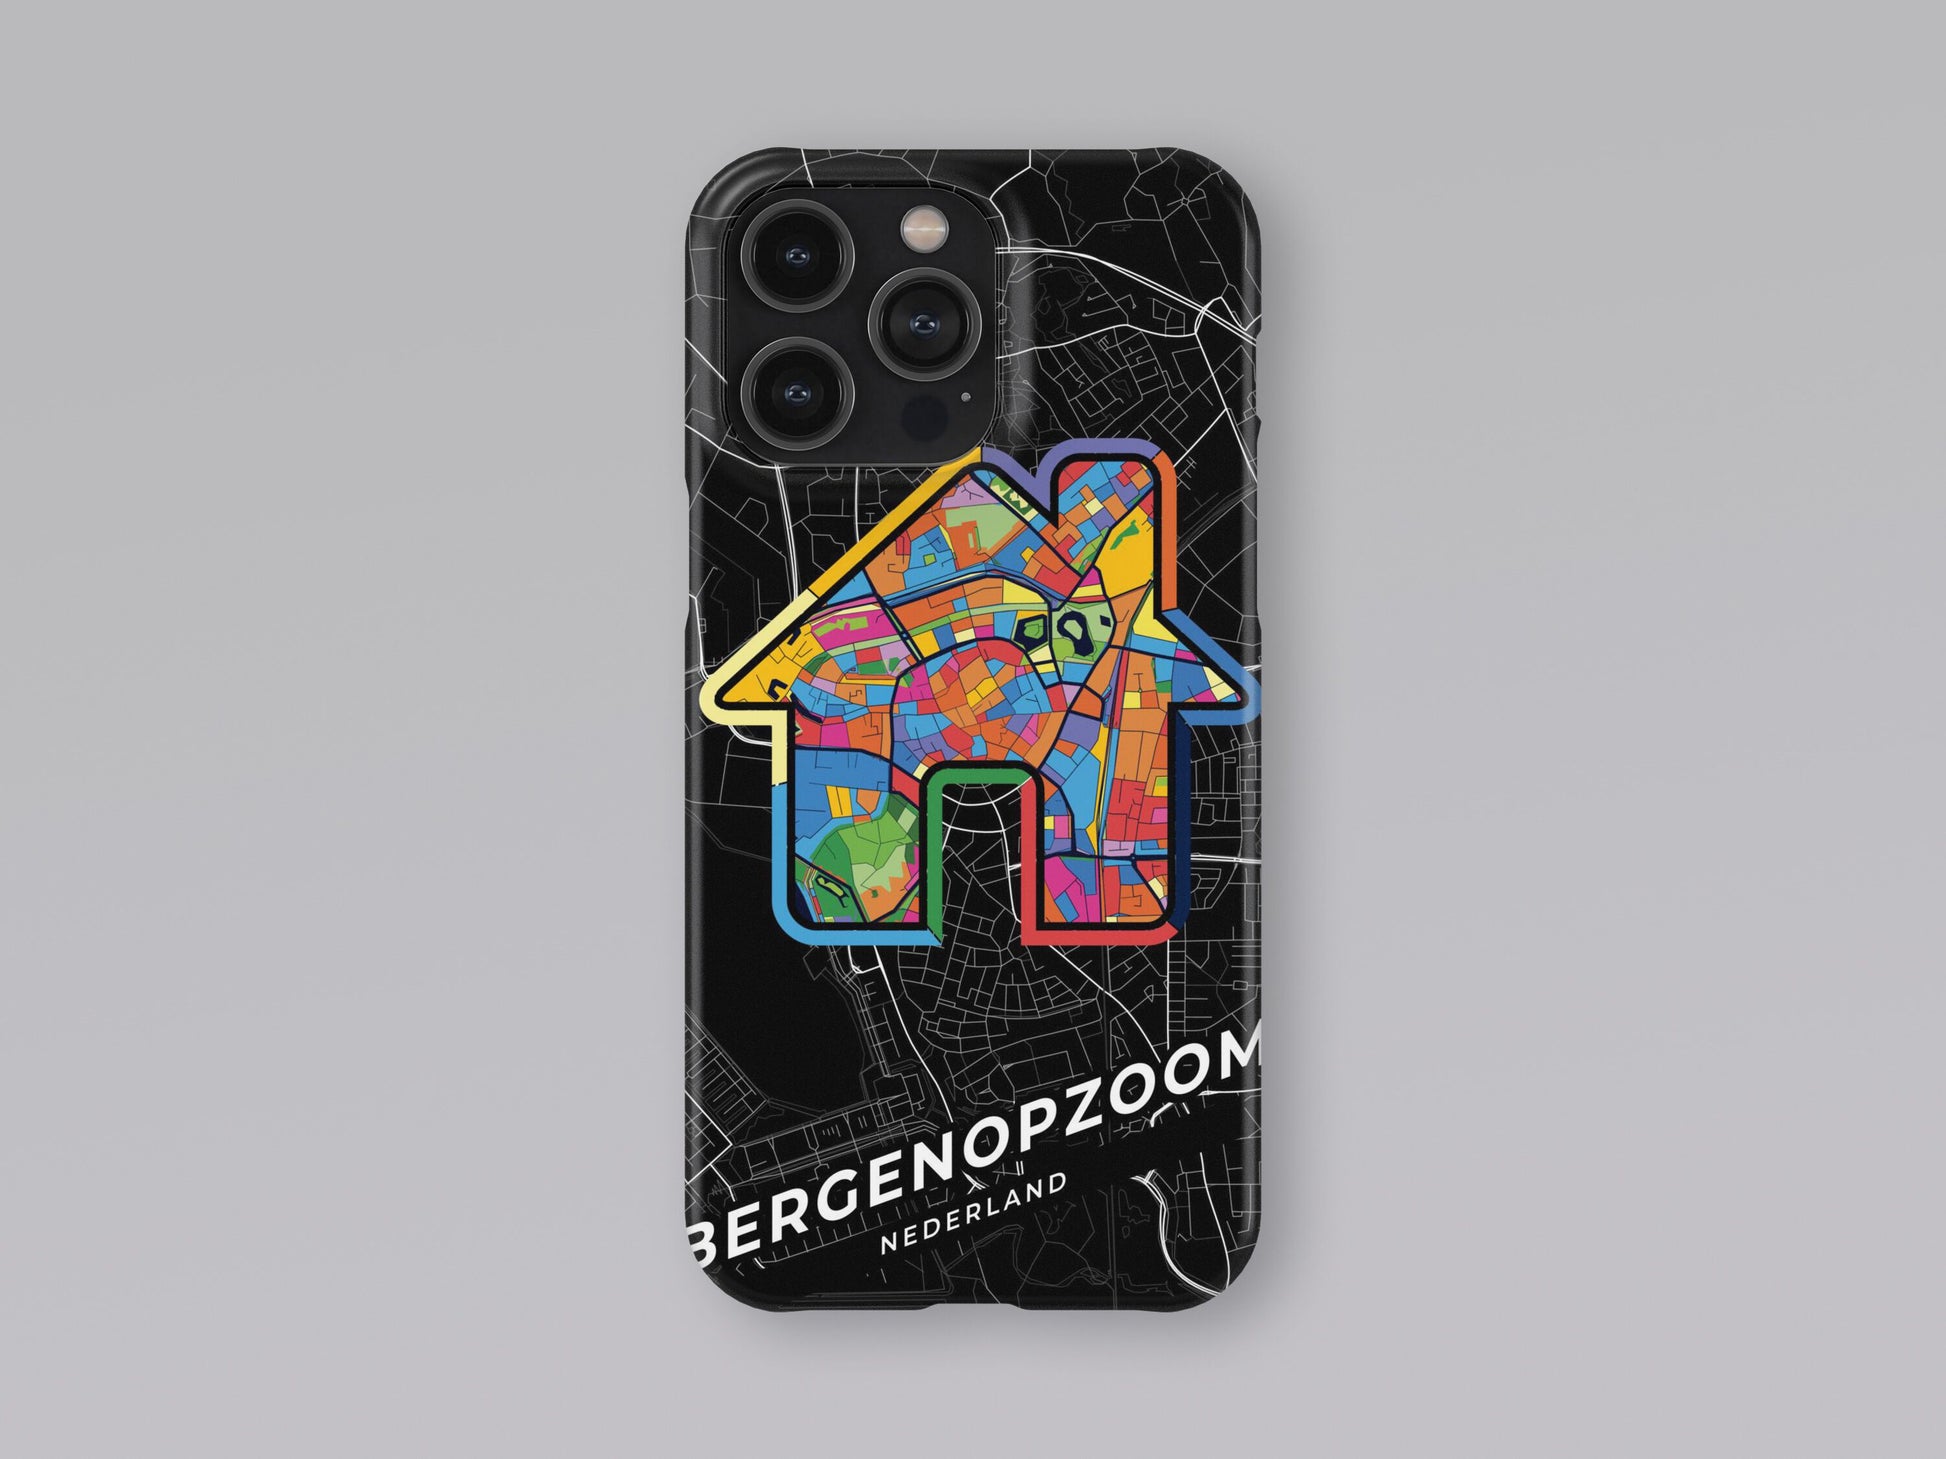 Bergen Op Zoom Netherlands slim phone case with colorful icon. Birthday, wedding or housewarming gift. Couple match cases. 3